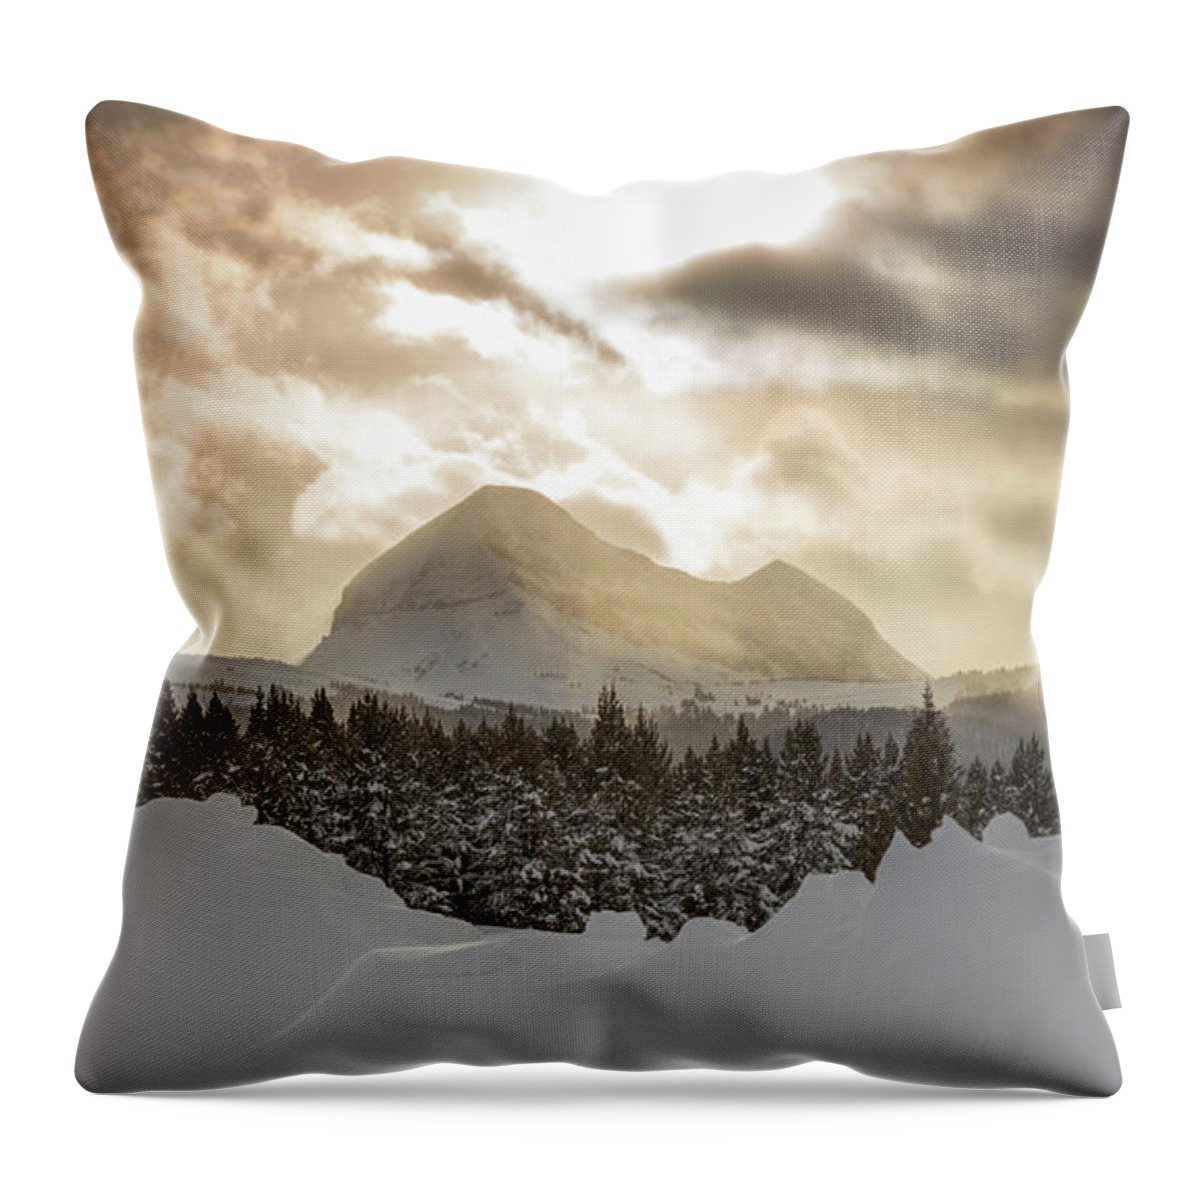 Durango Throw Pillow featuring the photograph Let Your Light Shine Down by Jen Manganello